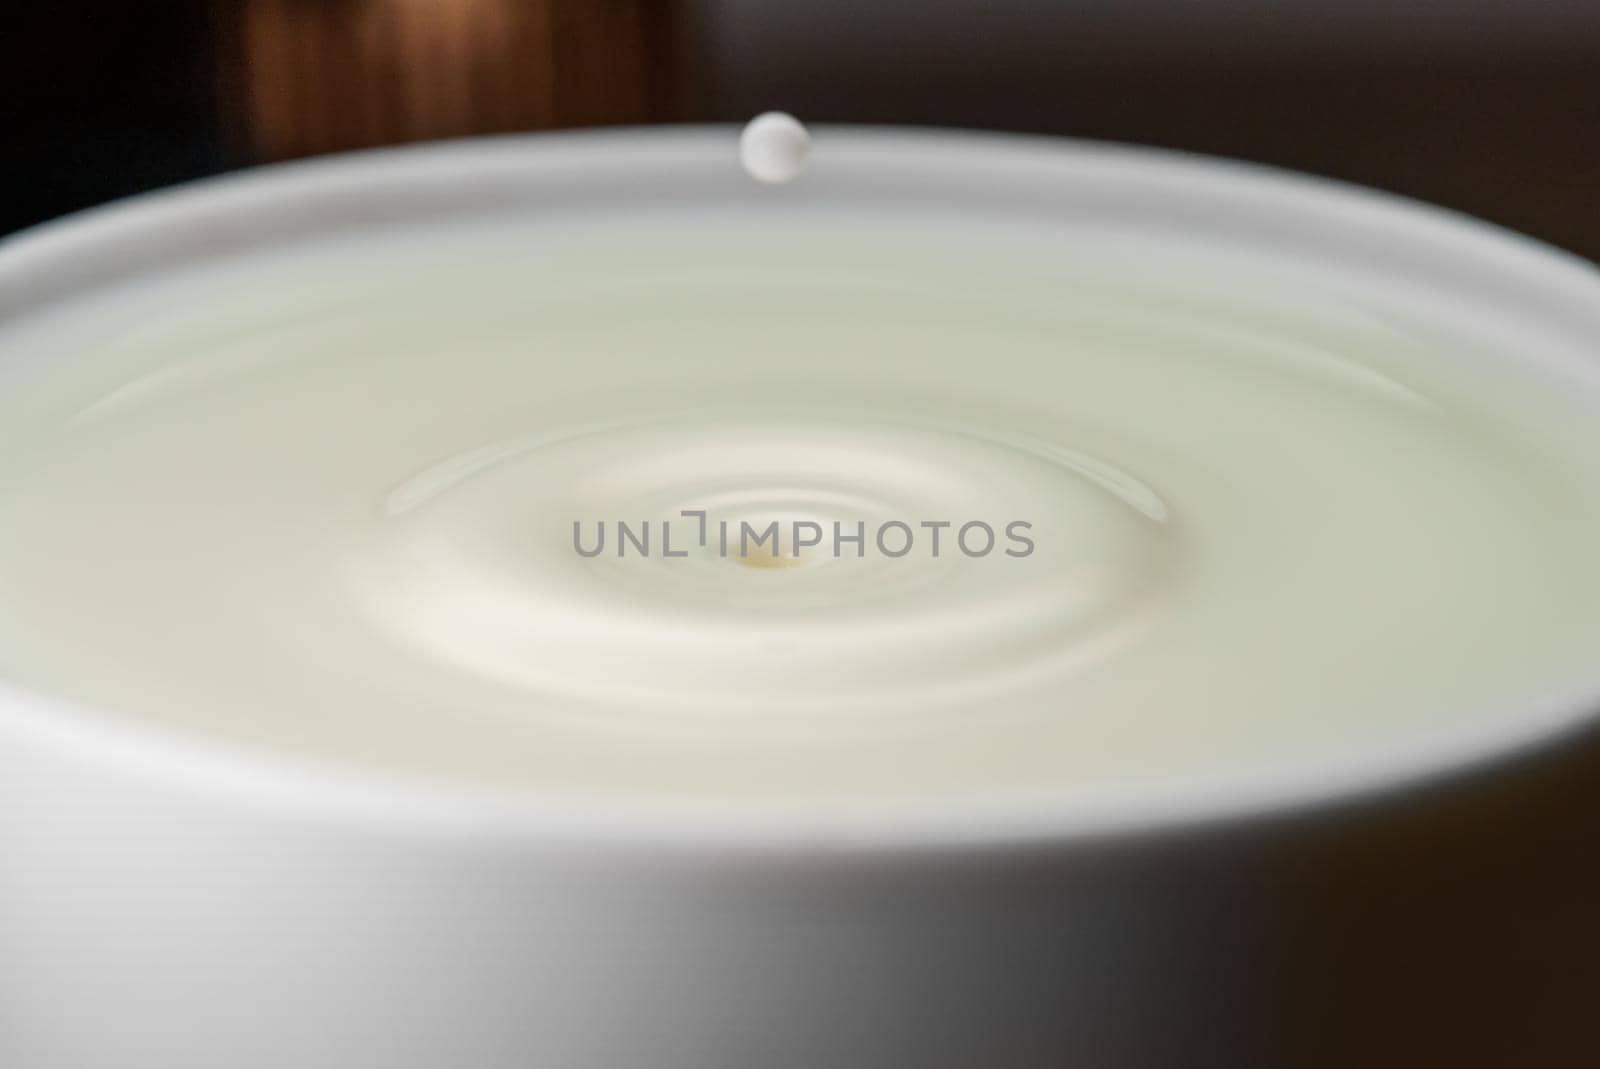 Milk drop falls into the filled cup.